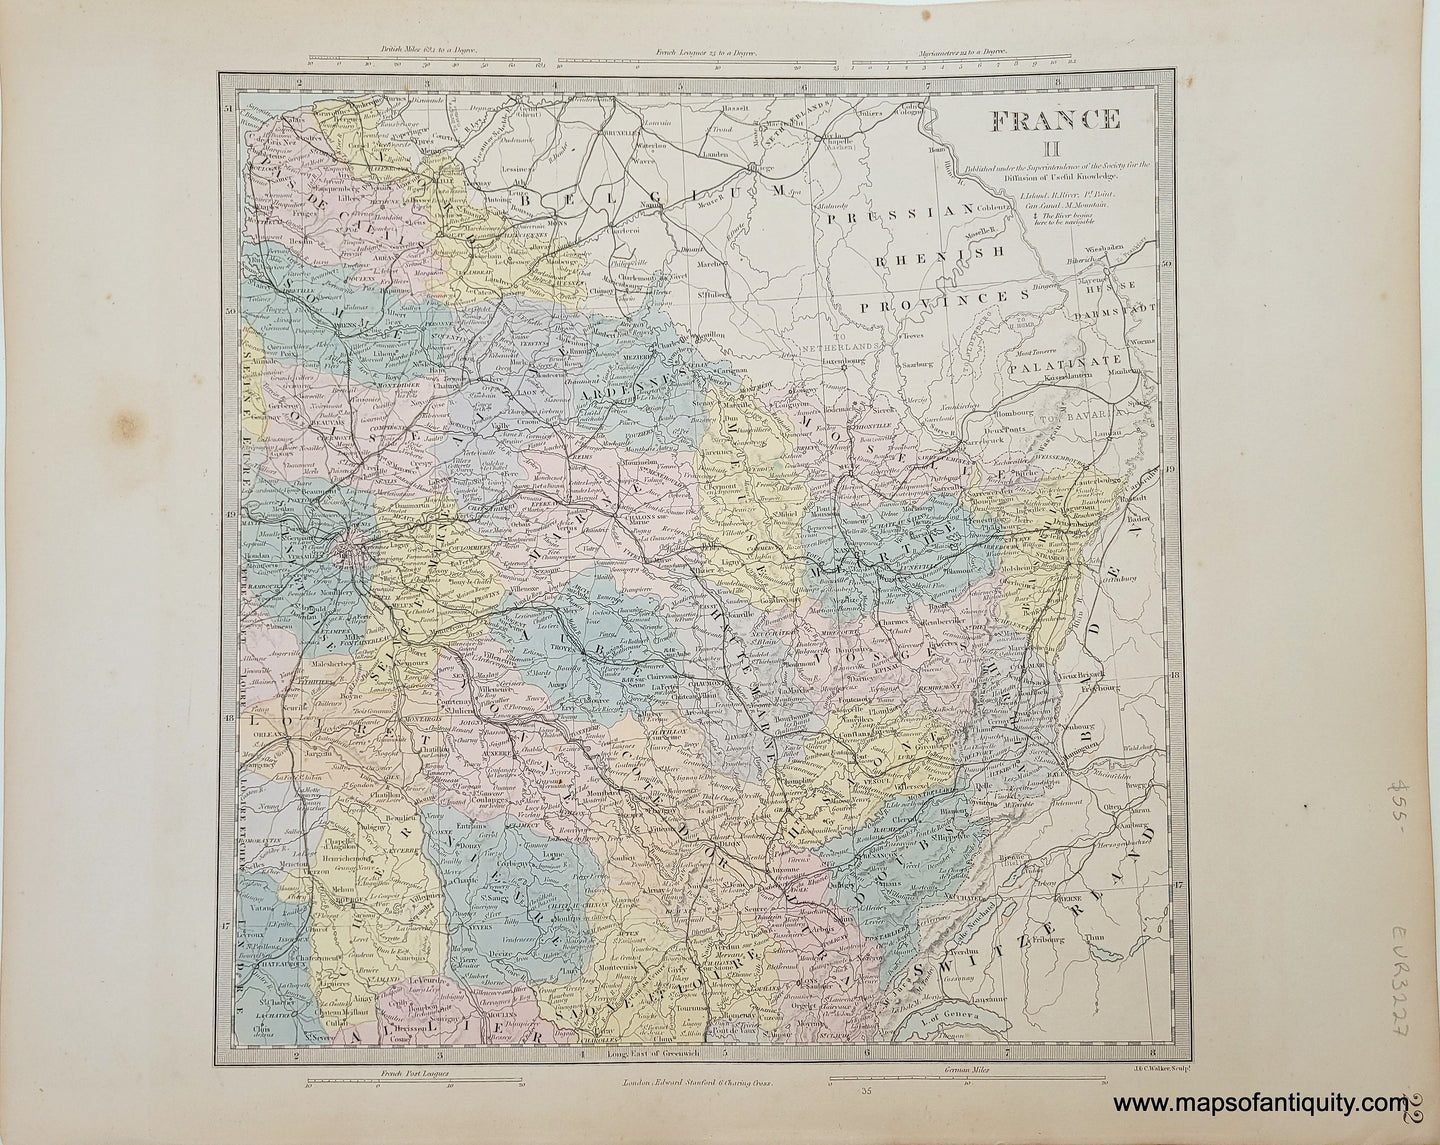 Genuine-Antique-Map-France-II-France--1860-SDUK-Society-for-the-Diffusion-of-Useful-Knowledge-Maps-Of-Antiquity-1800s-19th-century